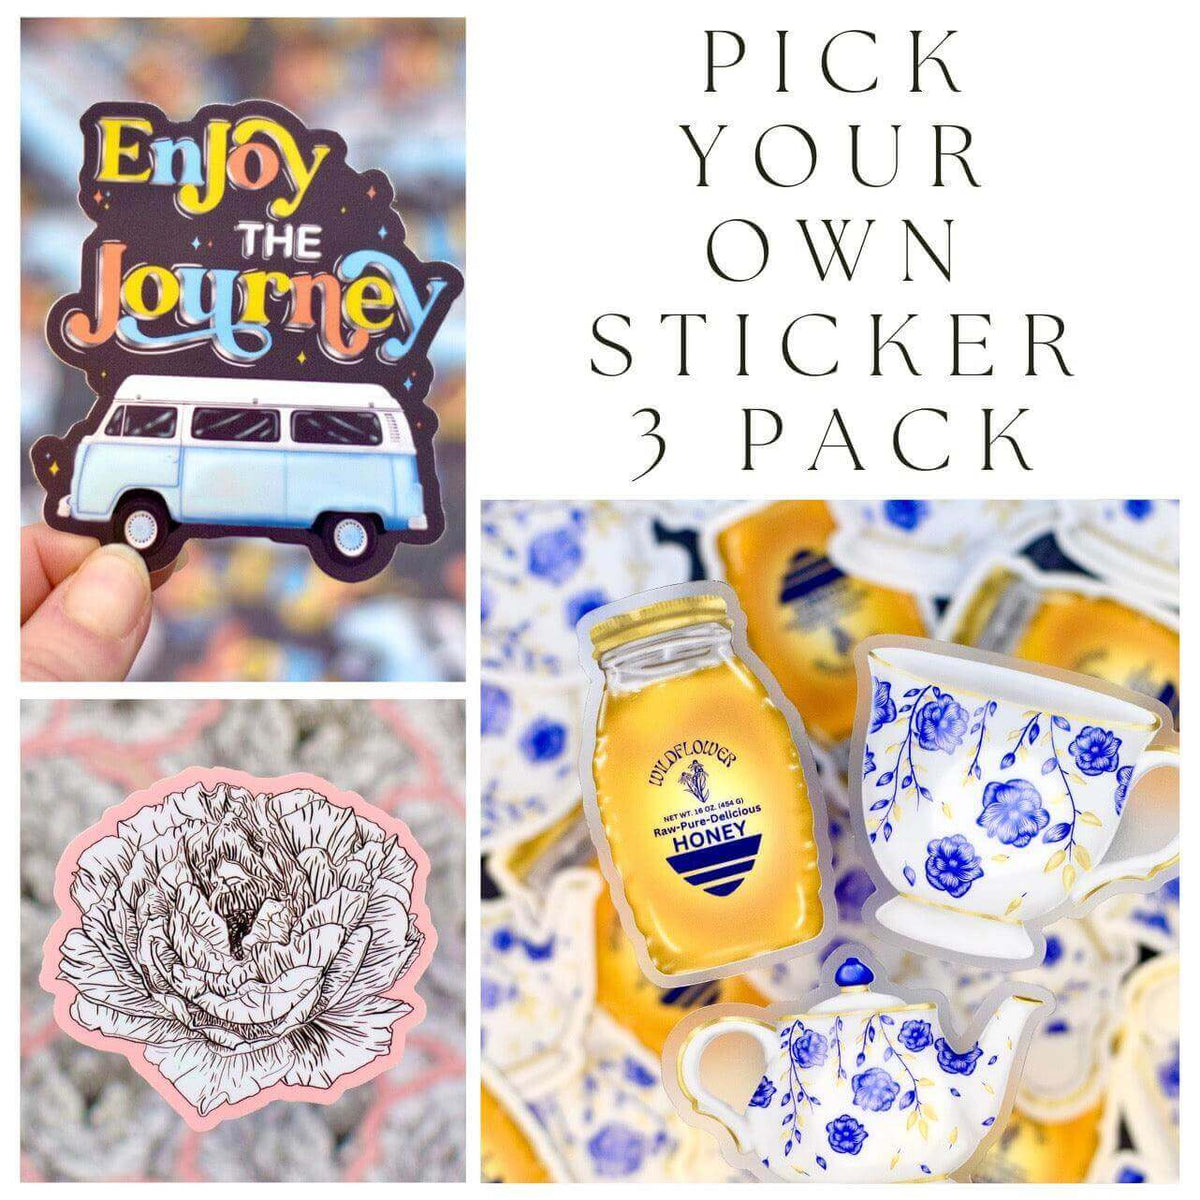 Logo or photo Stickers, pack of 50, Waterproof and UV Resistant Vinyl –  Designs by Stacey Lynn